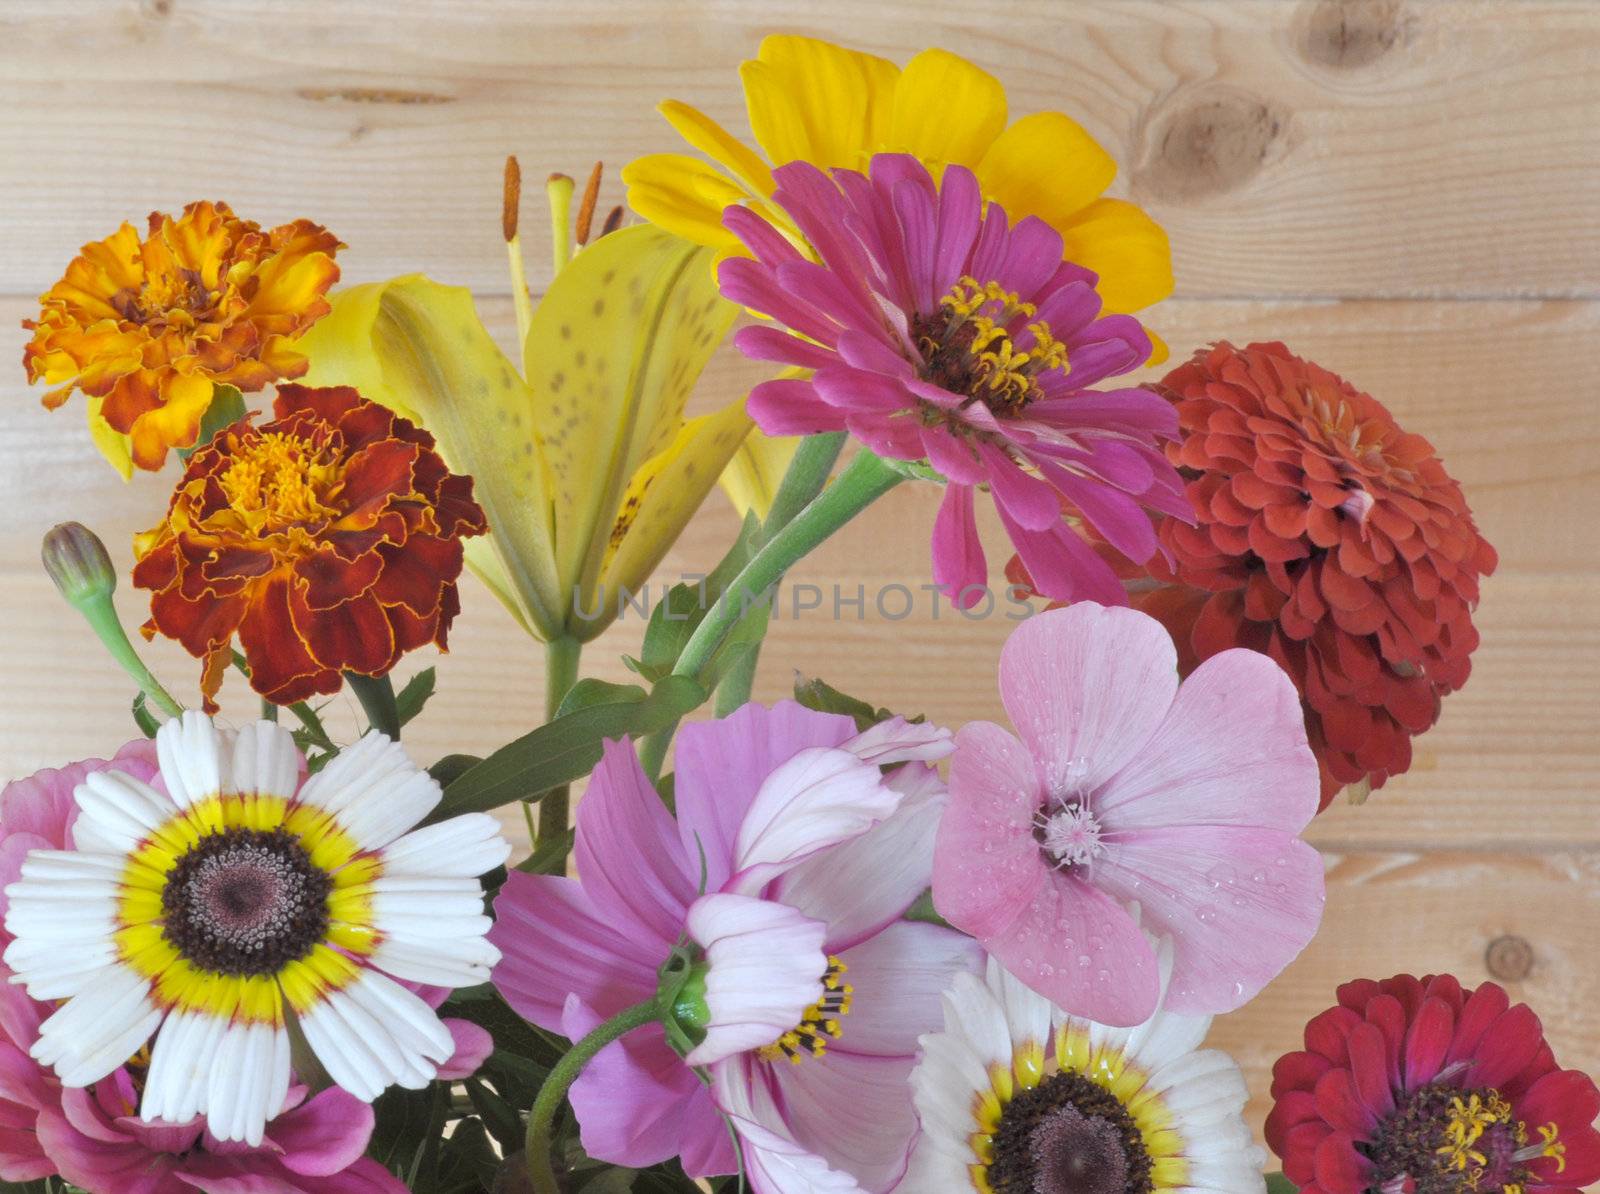 Bouquet of garden flowers against a wooden wall. August, the Central Russia